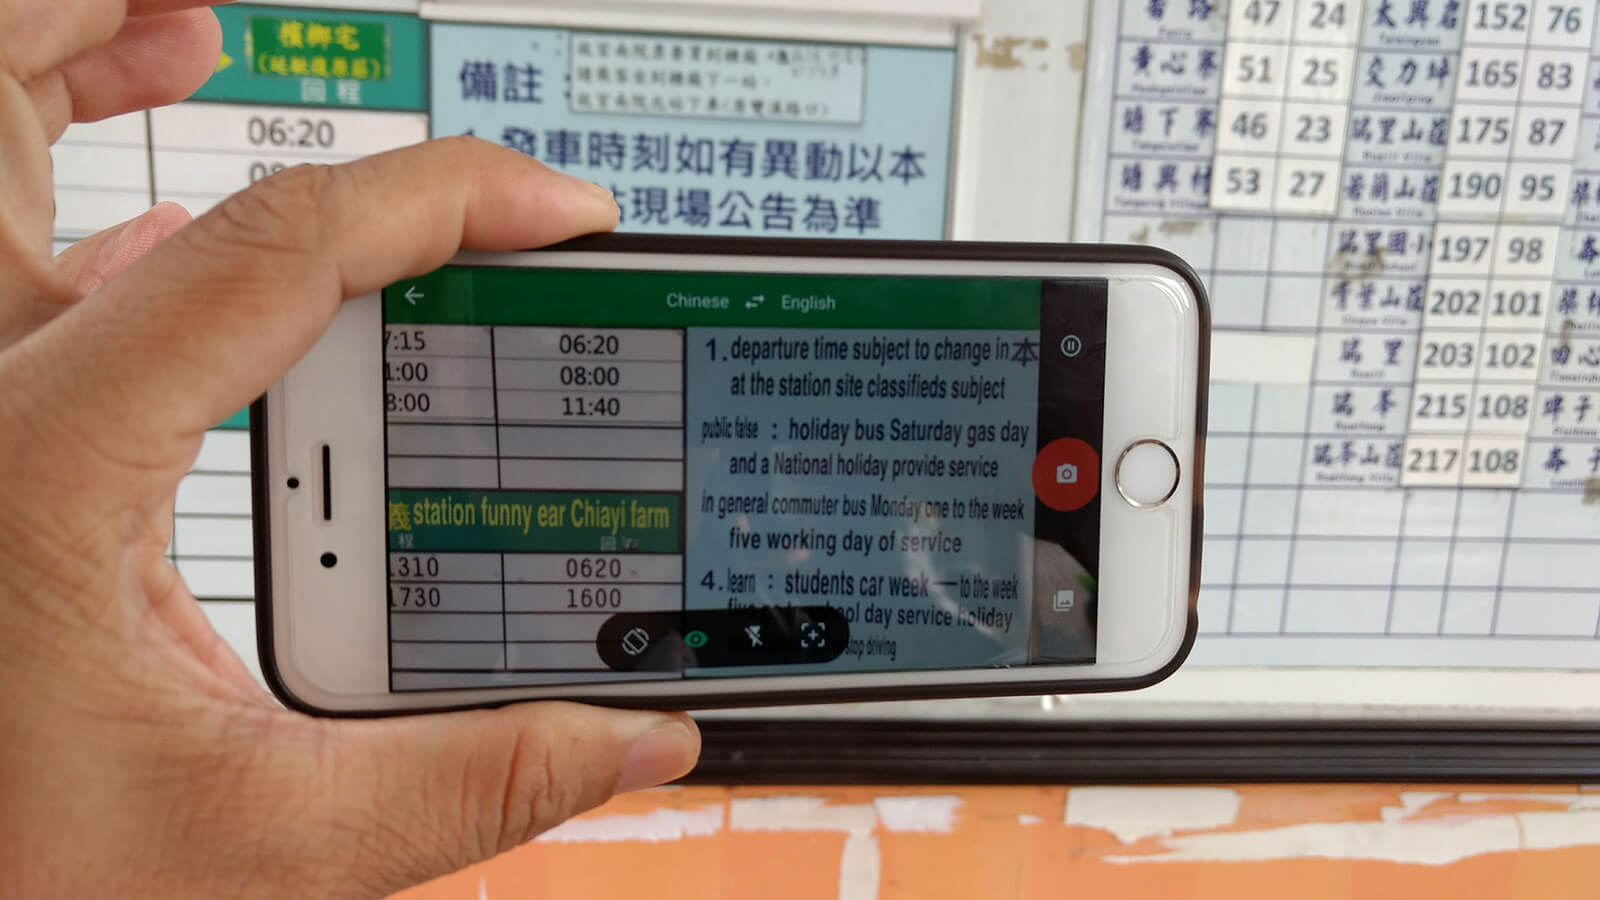 Have app, will order turkey rice: Using Google Translate on our trip